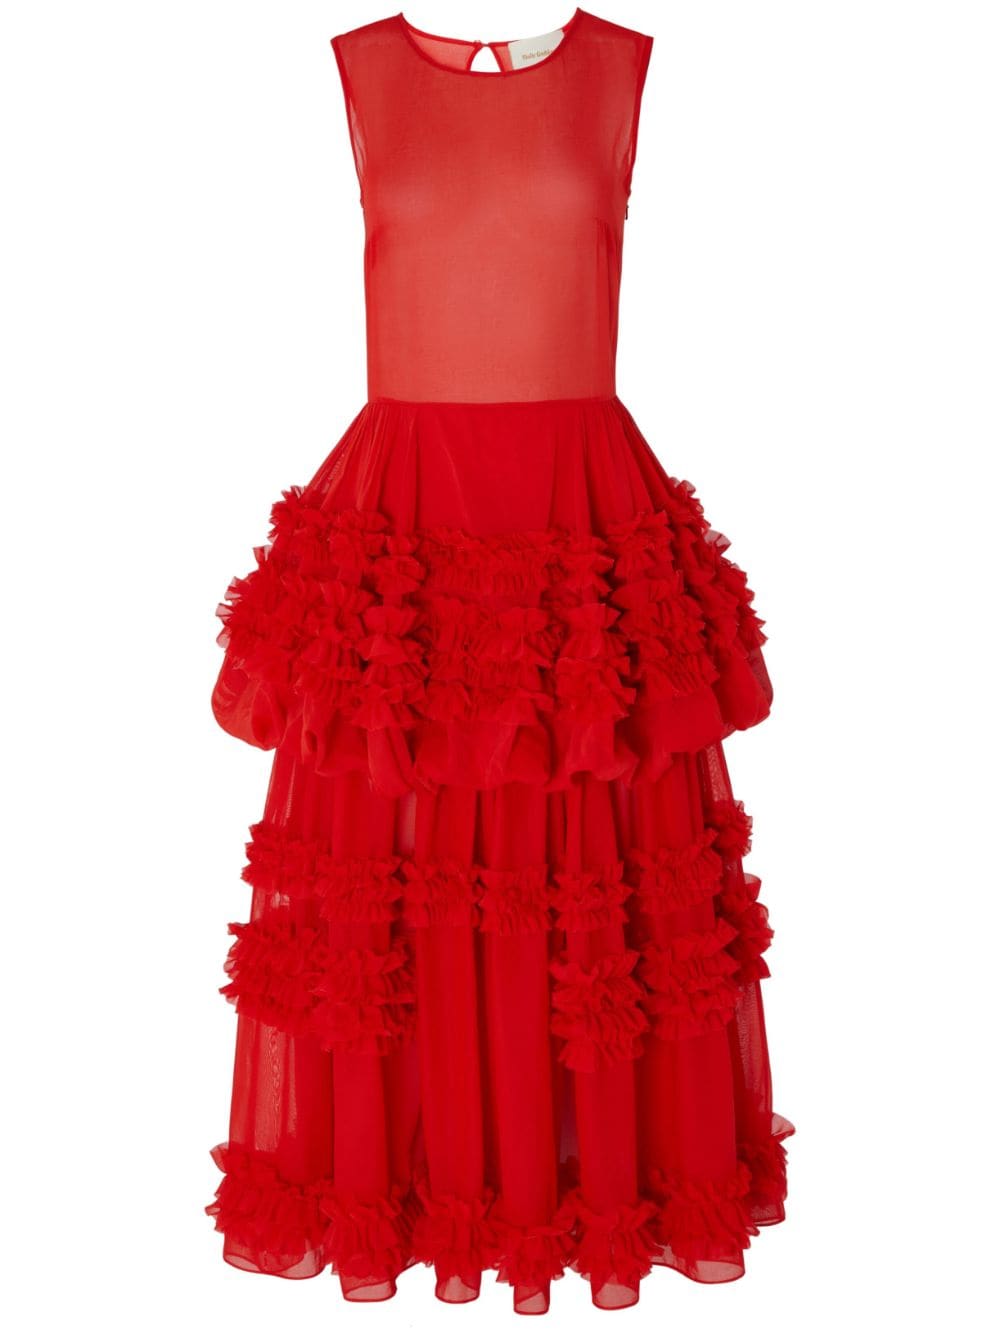 MOLLY GODDARD DOLORES RUFFLED TIERED DRESS